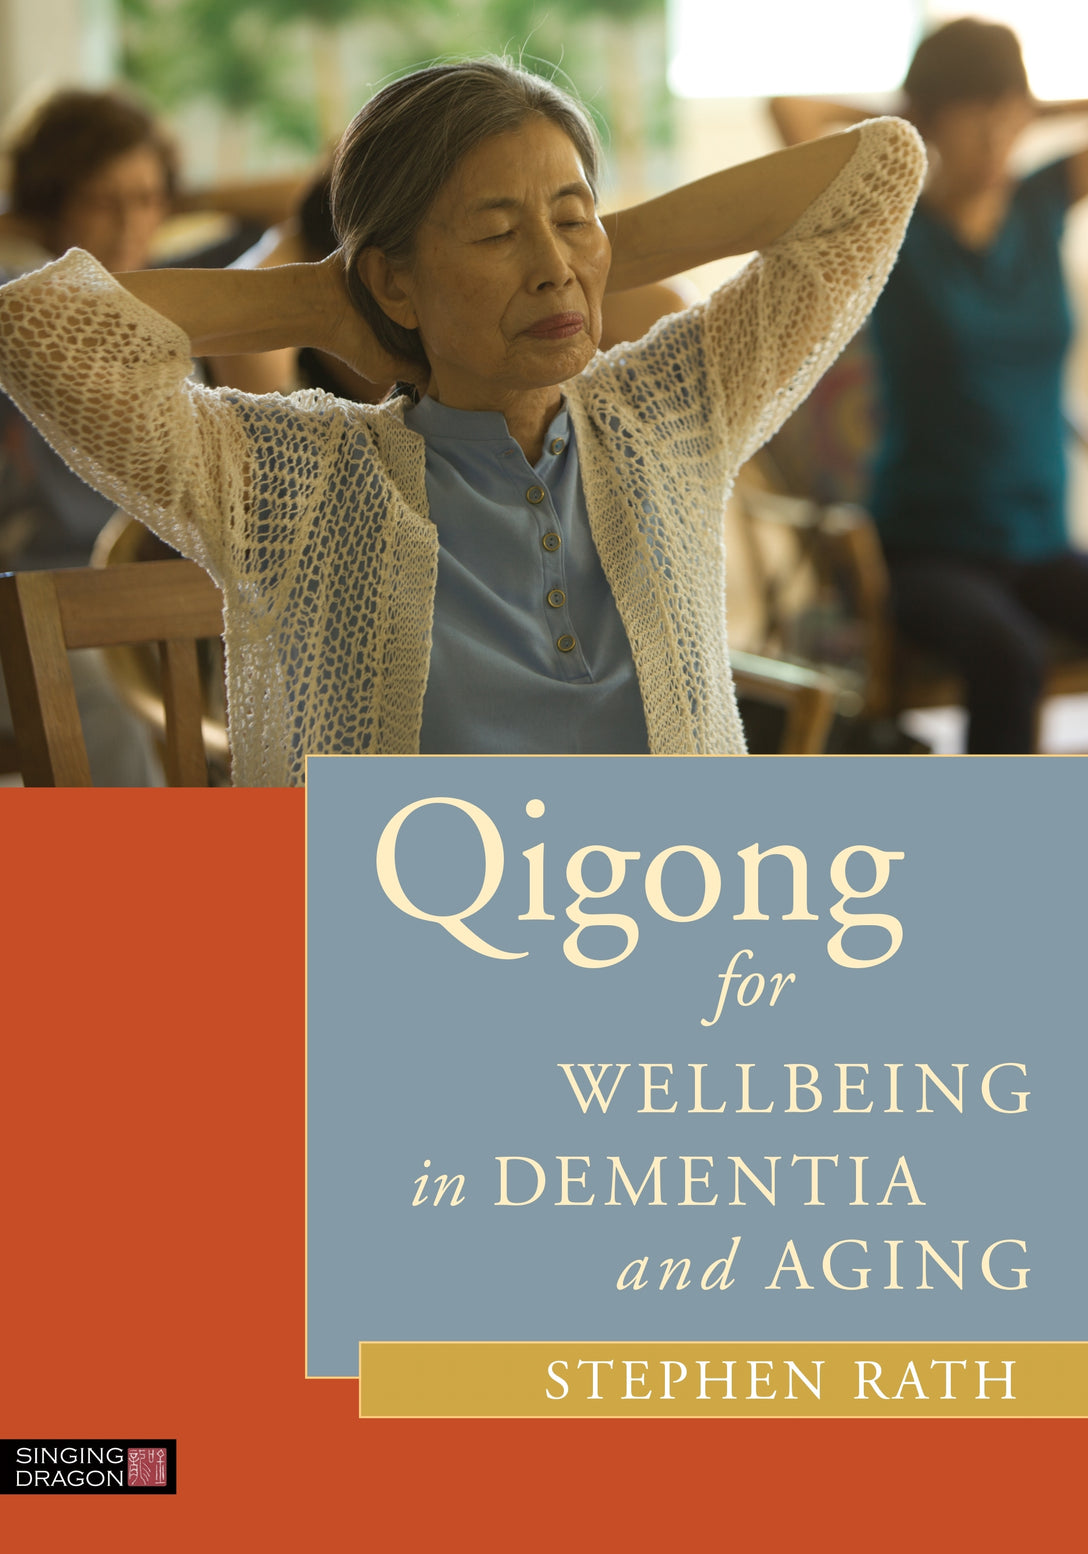 Qigong for Wellbeing in Dementia and Aging by LauRha Frankfort, Stephen Rath